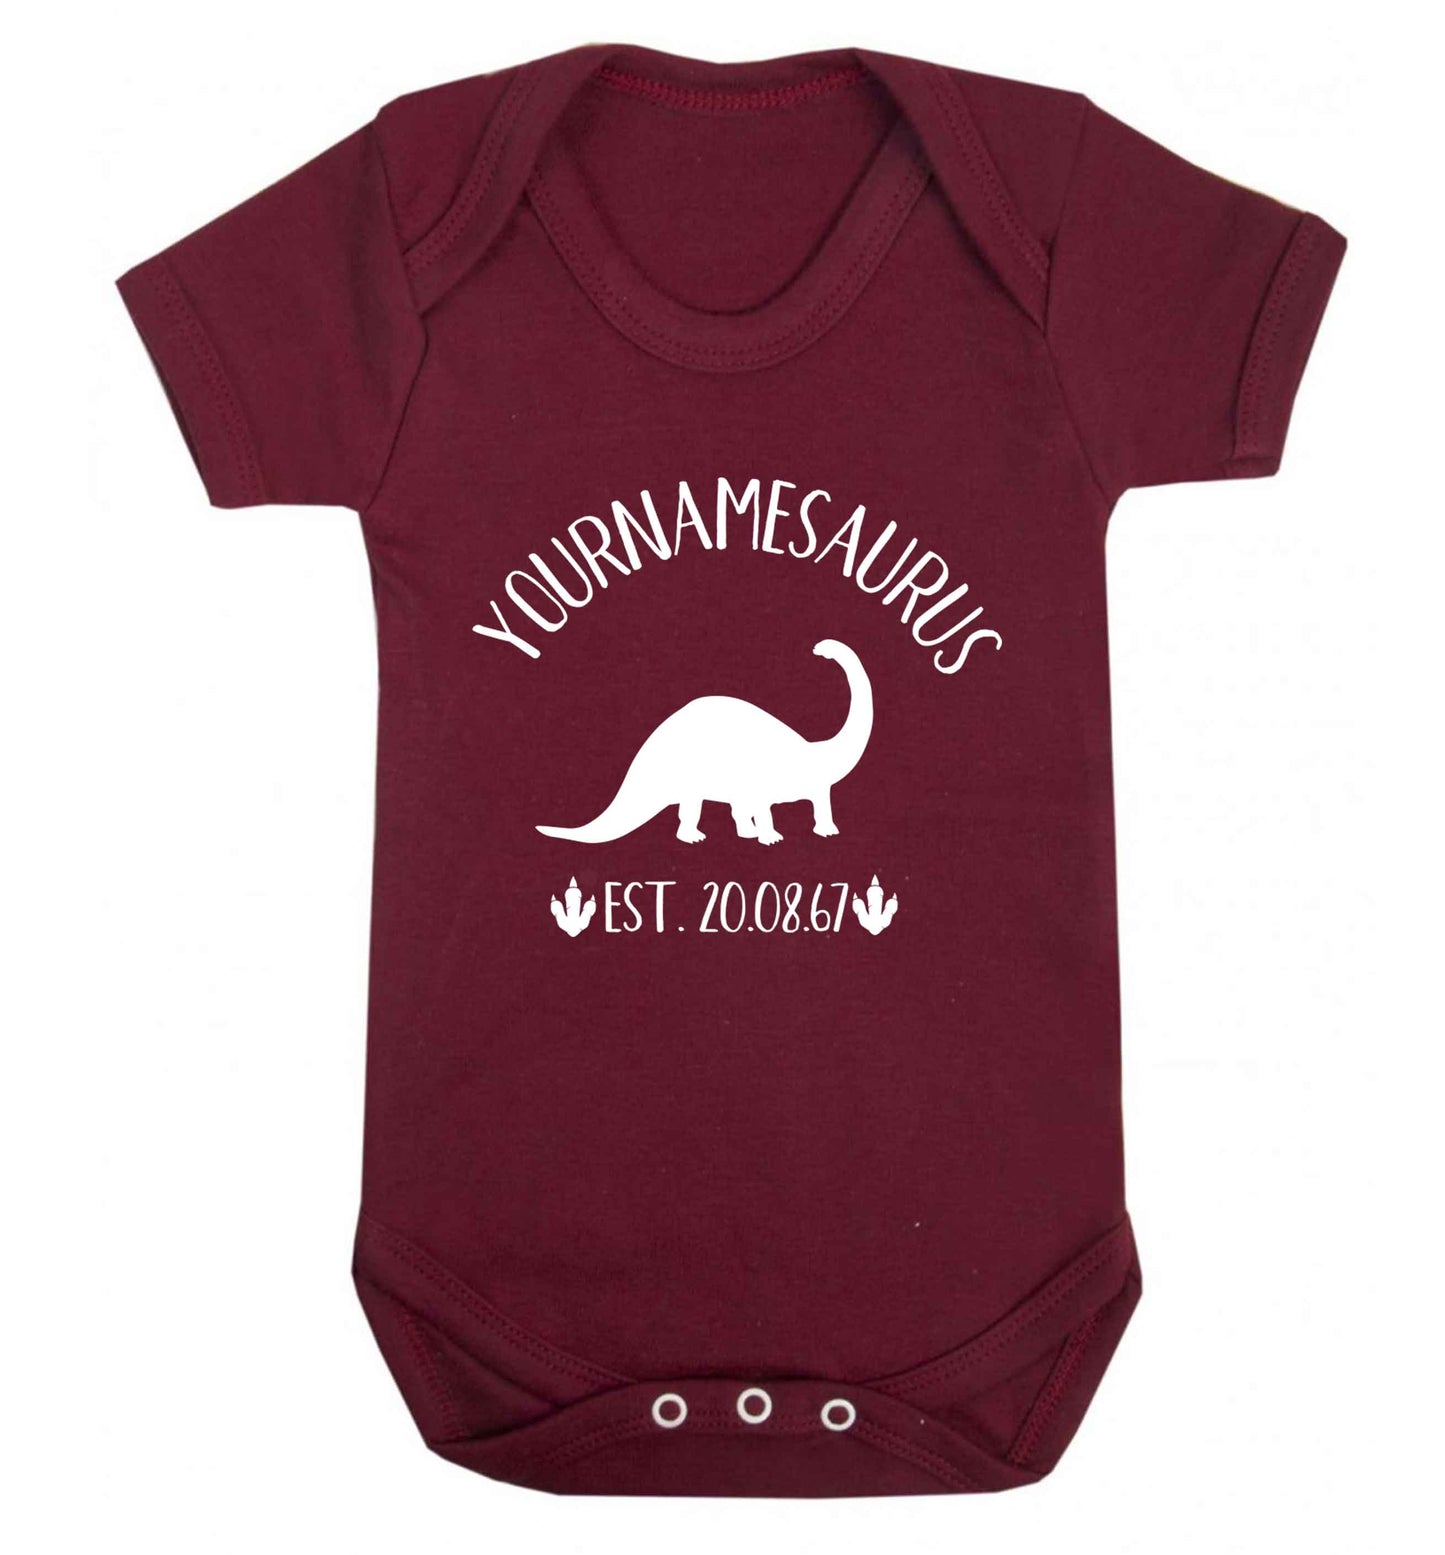 Personalised (your name) dinosaur birthday Baby Vest maroon 18-24 months